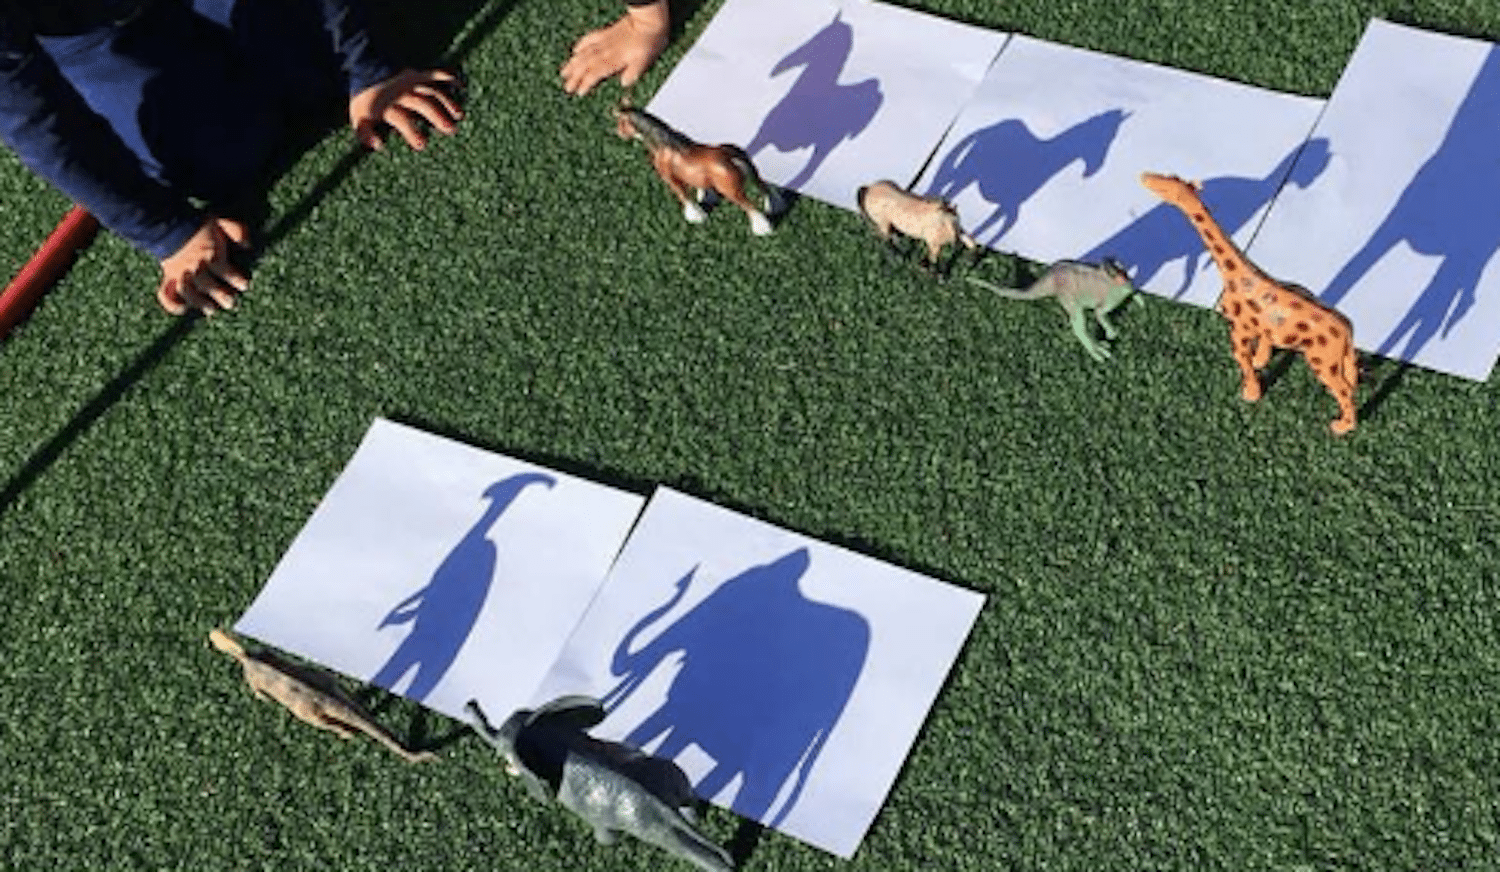 Try This Shadow Drawing Project With Your Kids - Simplemost